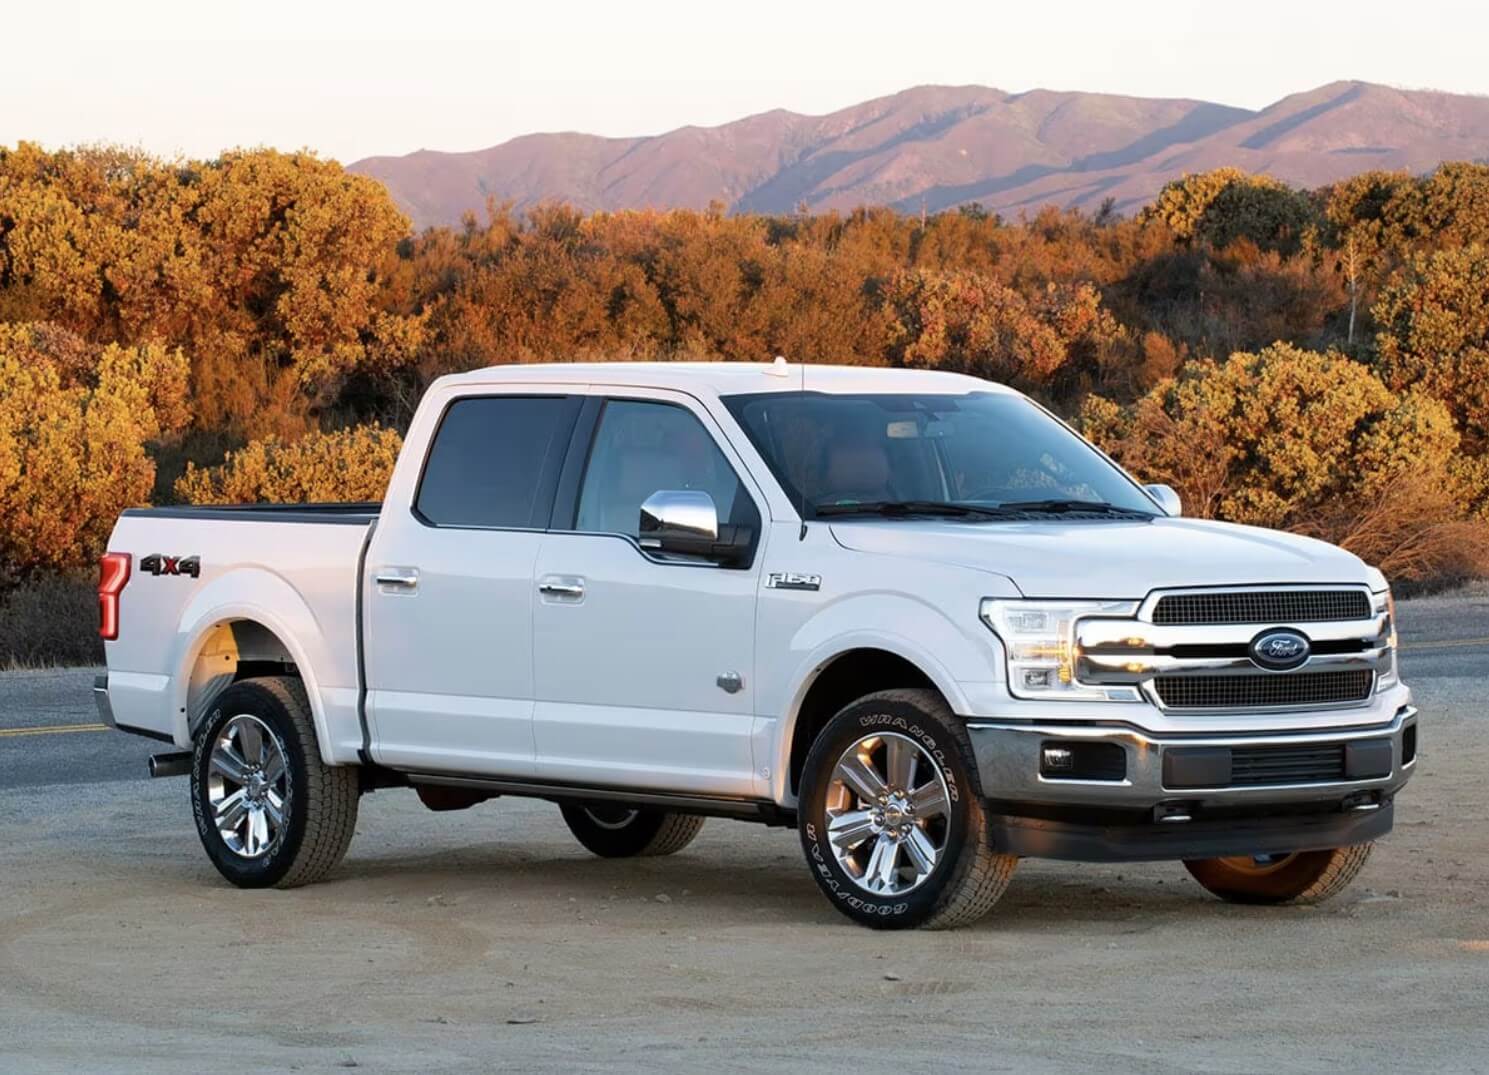 Used truck: A white 2018 Ford F-150 model parked near trees